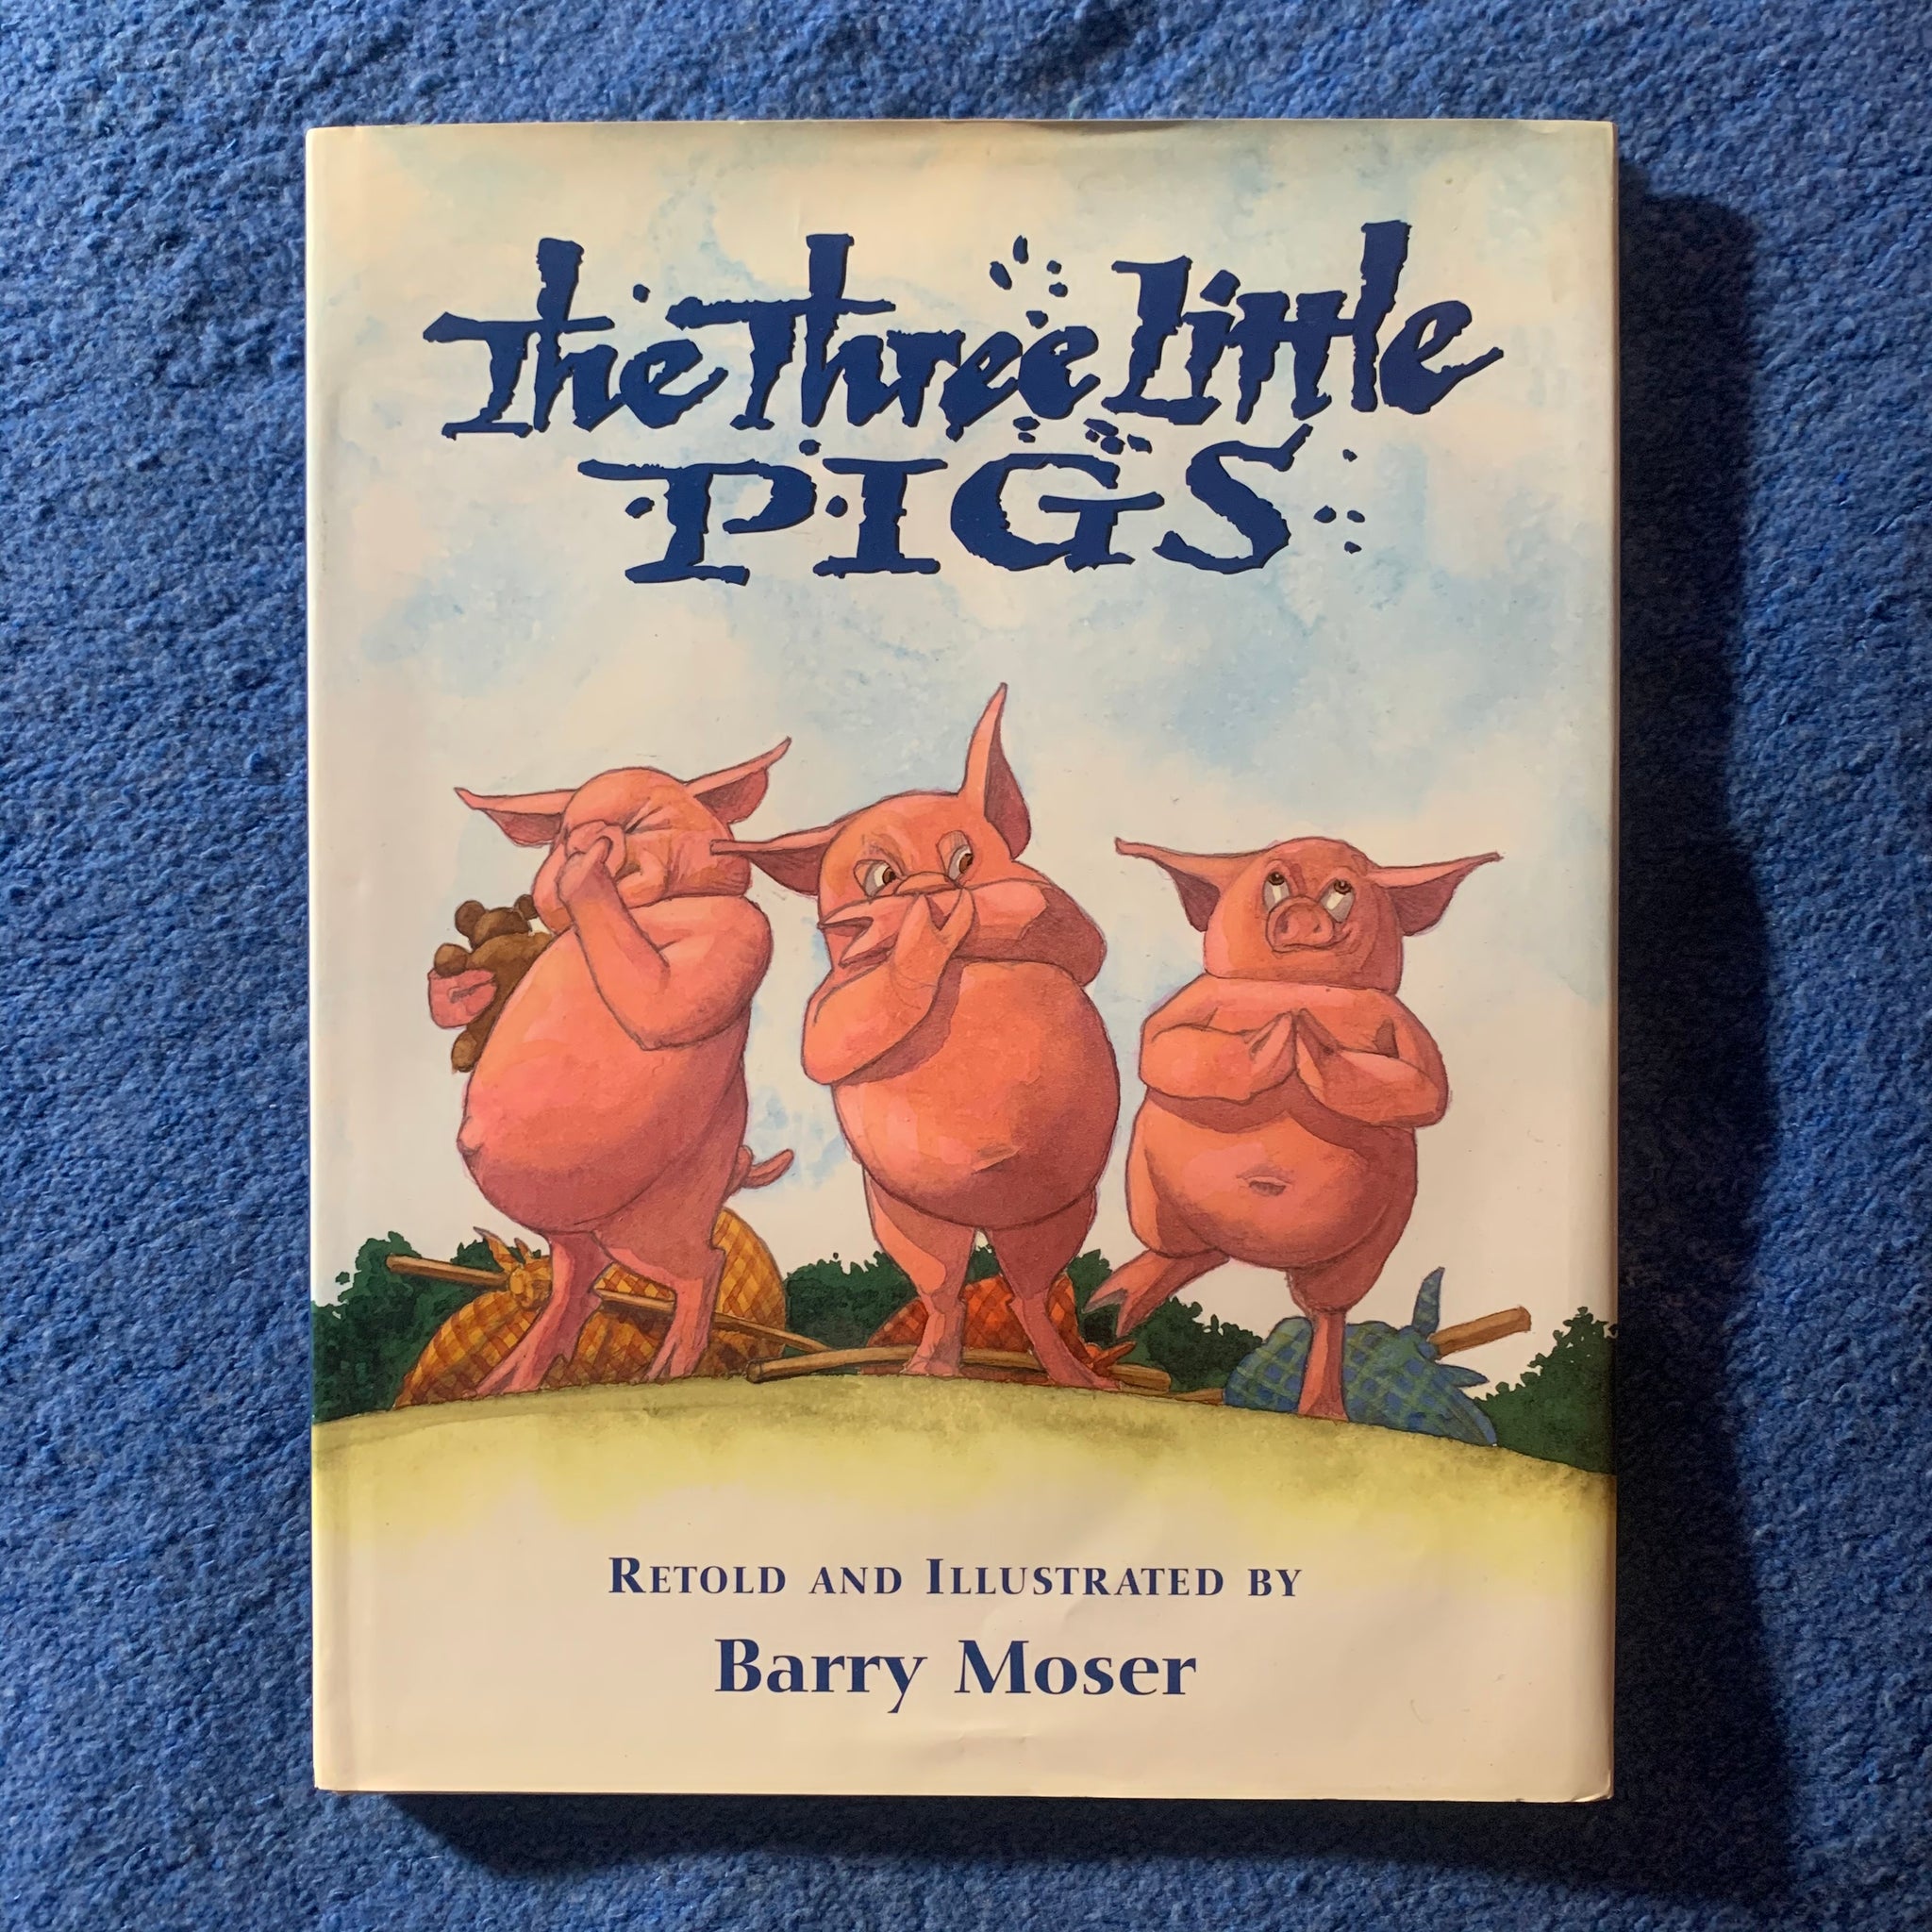 The Three Little Pigs by Barry Moser